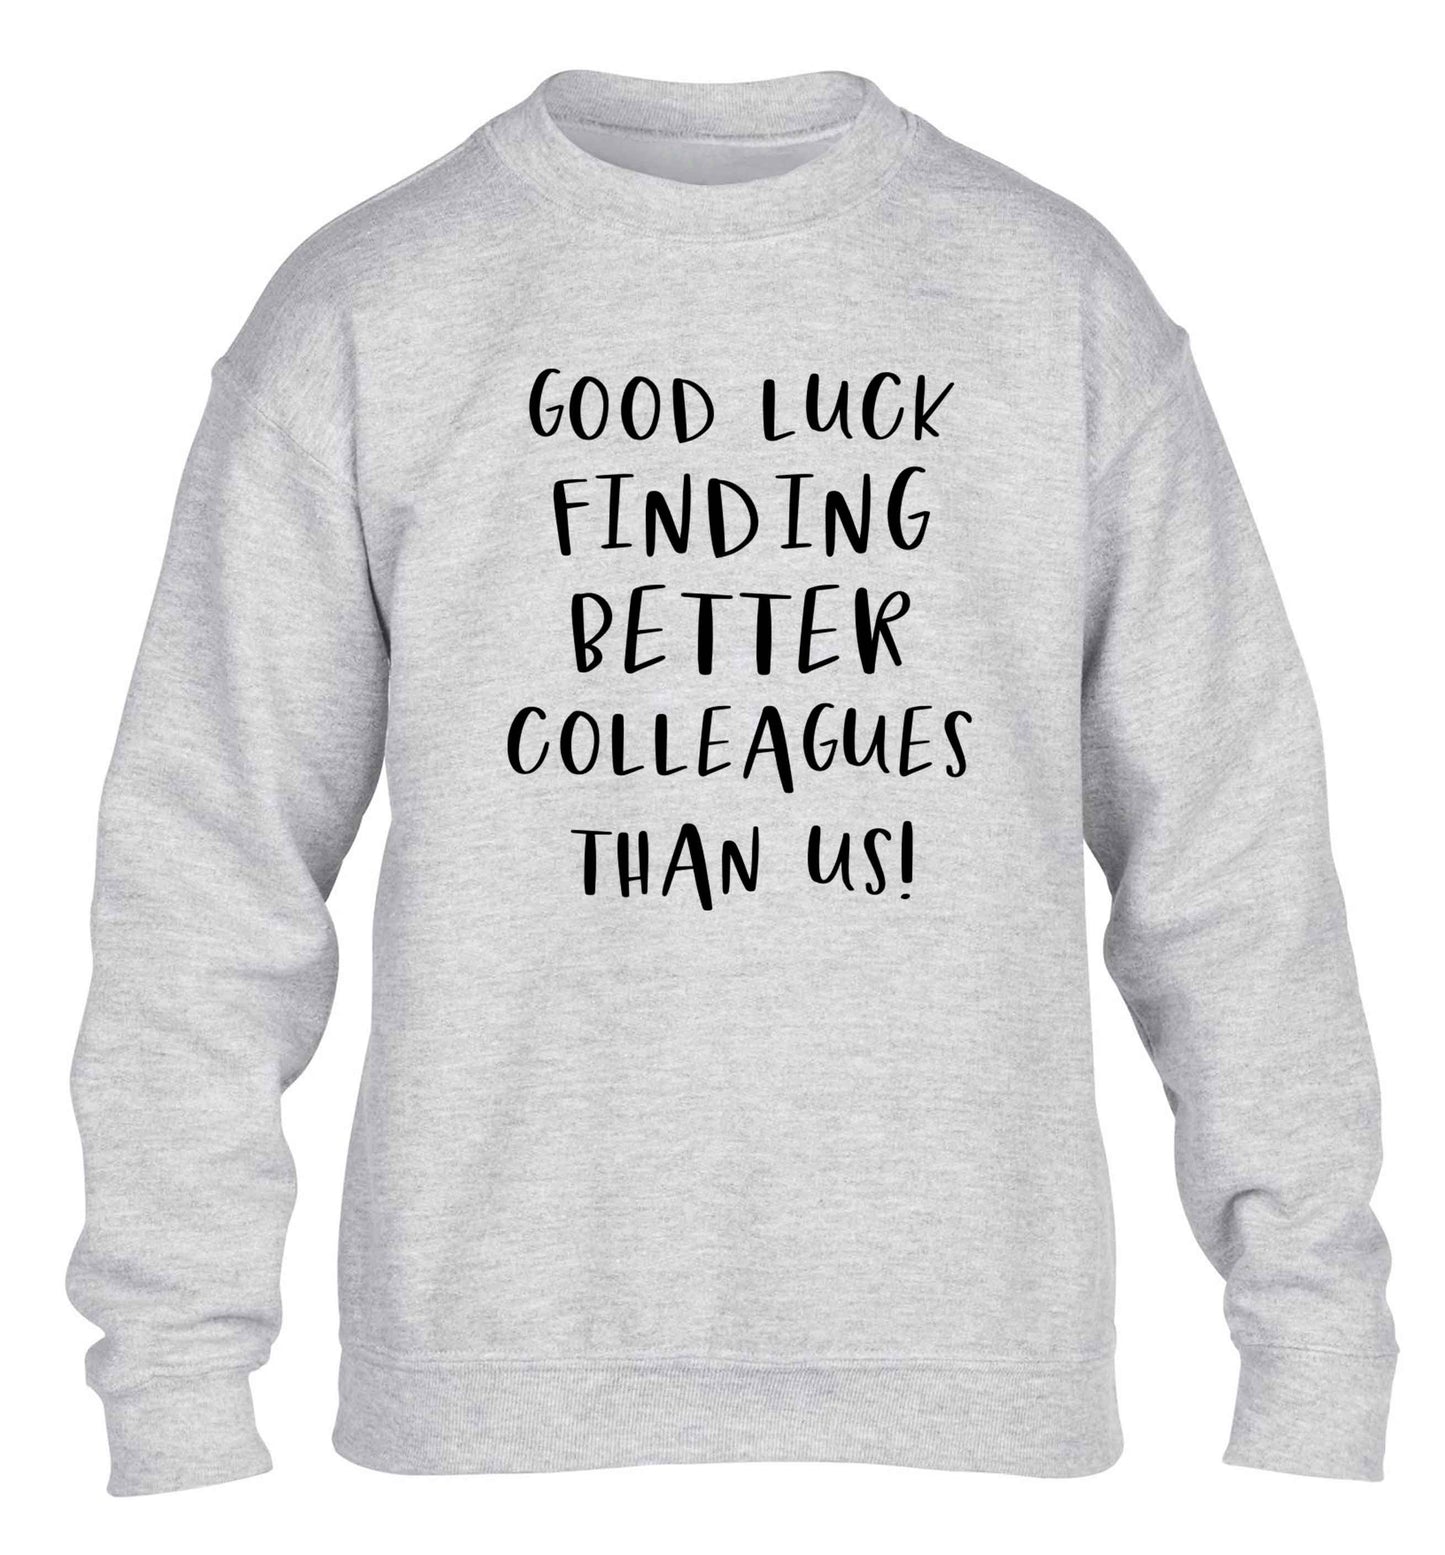 Good luck finding better colleagues than us! children's grey sweater 12-13 Years